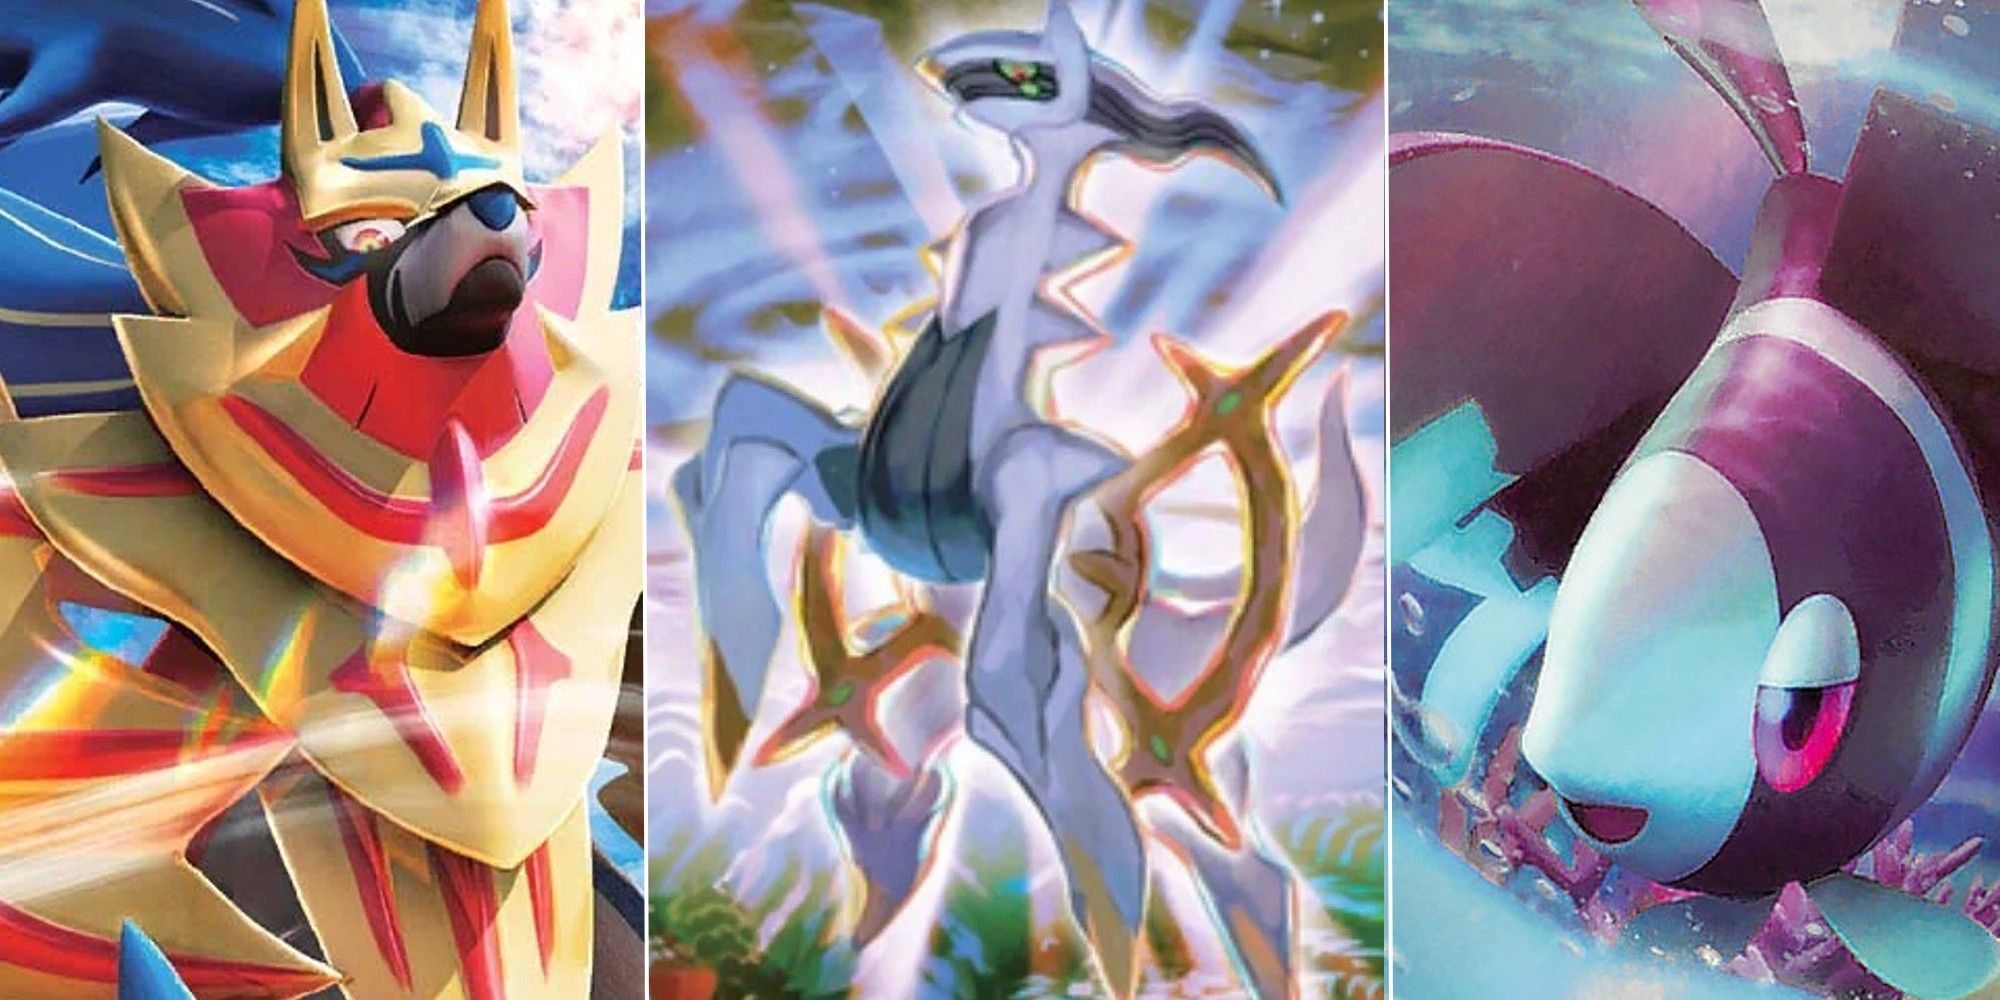 POKEMON TCG: The 10 Best V Cards Feature Image: Zamazenta on the left, Arceus in the middle, Lumineon on the right, card arts